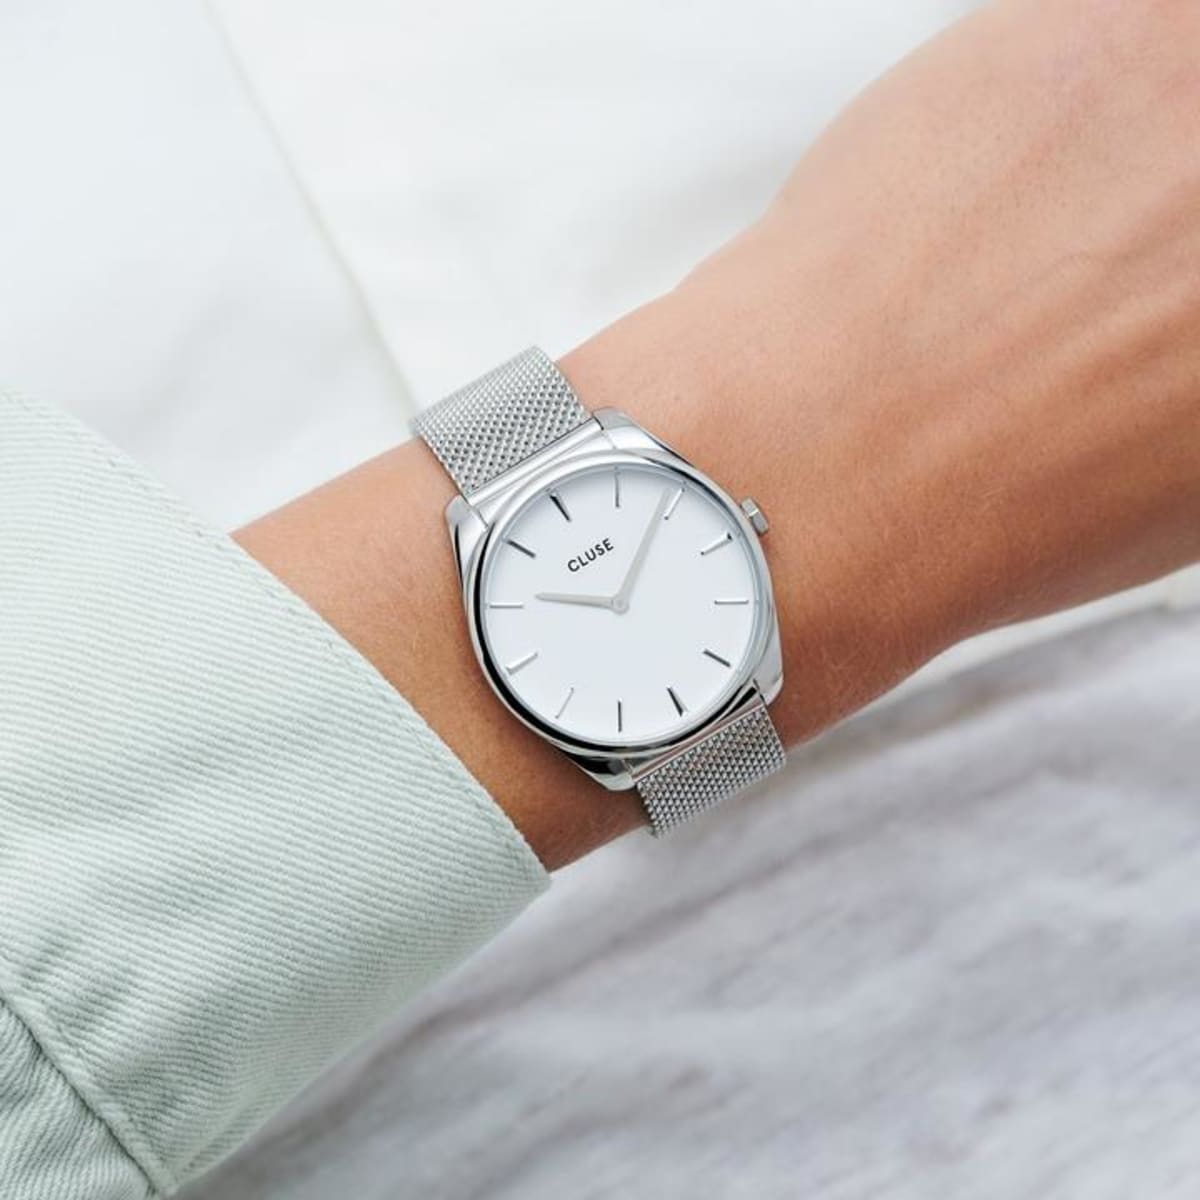 If you like to blur the lines between minimalism and glamour, this CLUSE Féroce watch offers you the best of both worlds. It's a true classic. An ode to our love for minimalism and joie de vivre. Its 36 mm case is refined but pronounced: a perfect companion for the mid-sized wrist. The matte white dial blends perfectly with the silver coloured case and mesh strap. You can easily interchange the strap of this Féroce model with any 18 mm CLUSE watch strap.